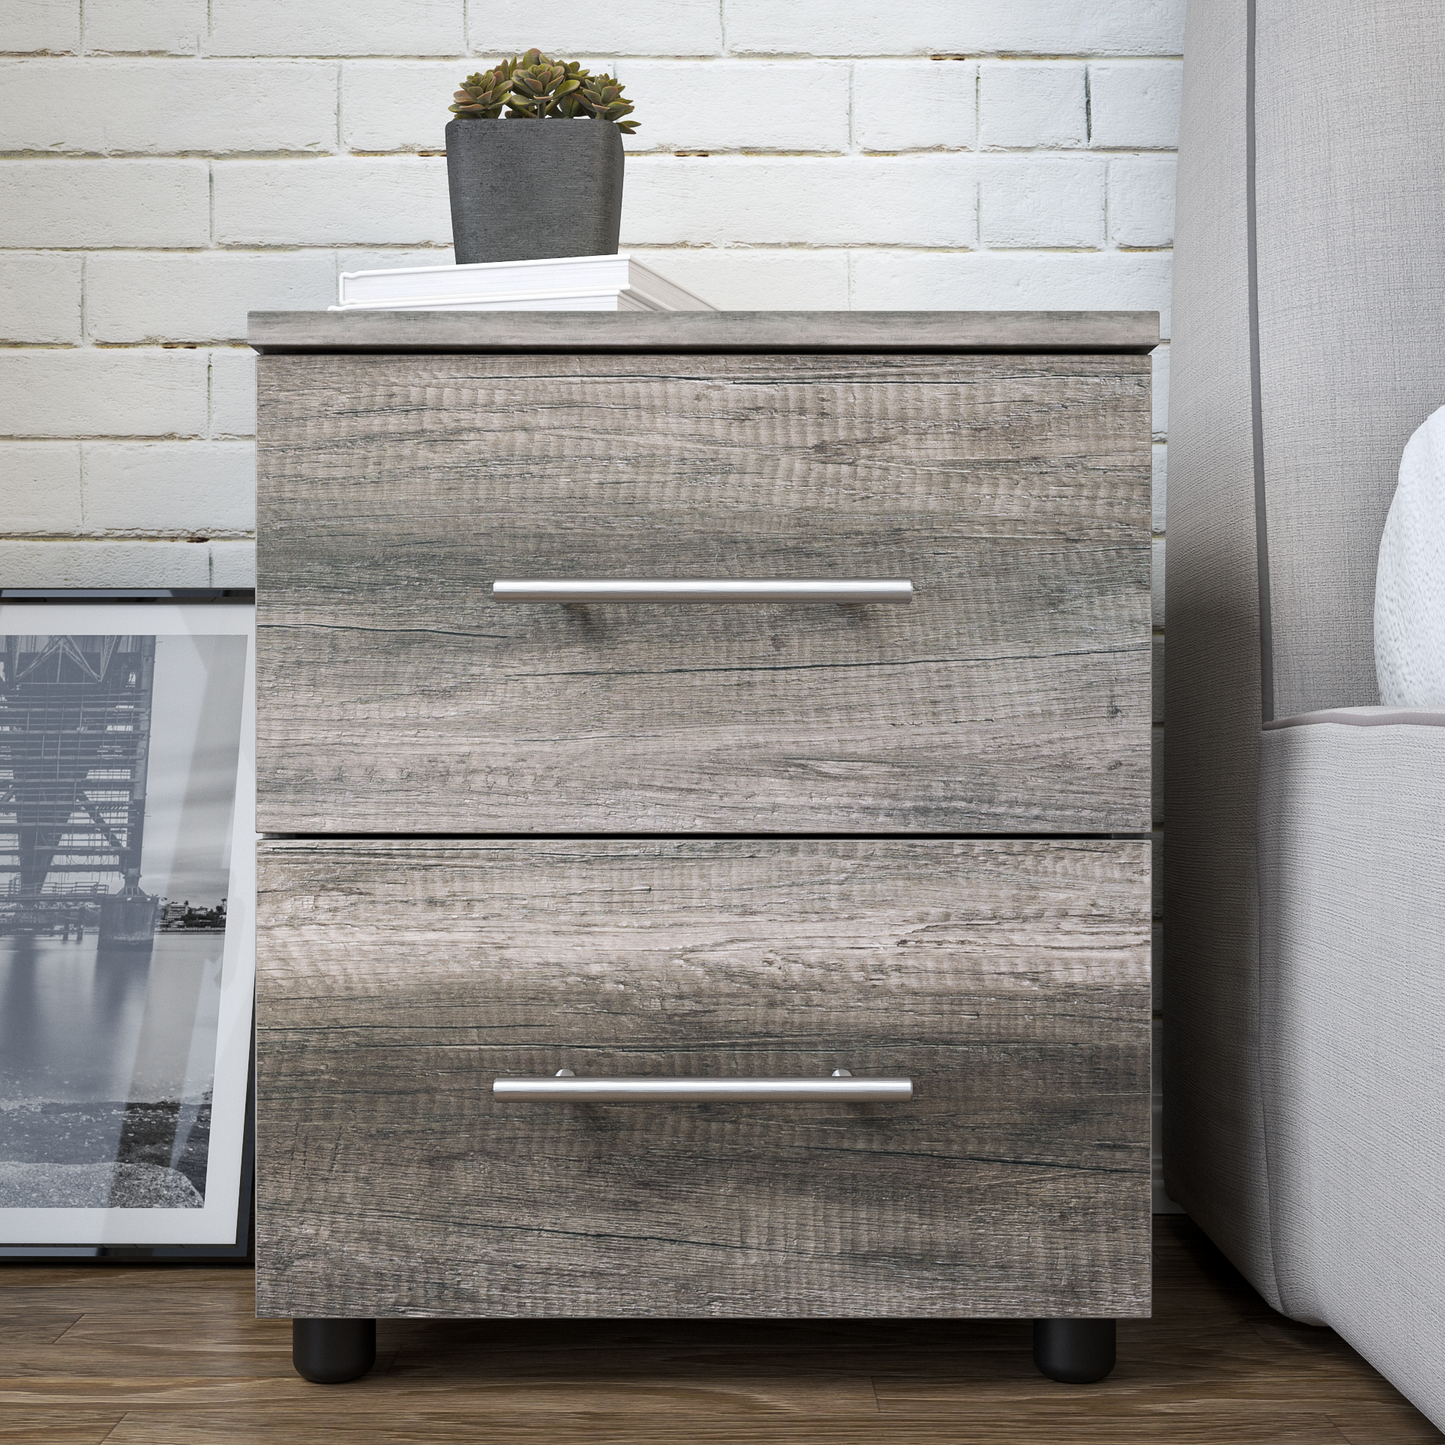 BAM! Oslo Two Drawer Night Stand - Monument Oak